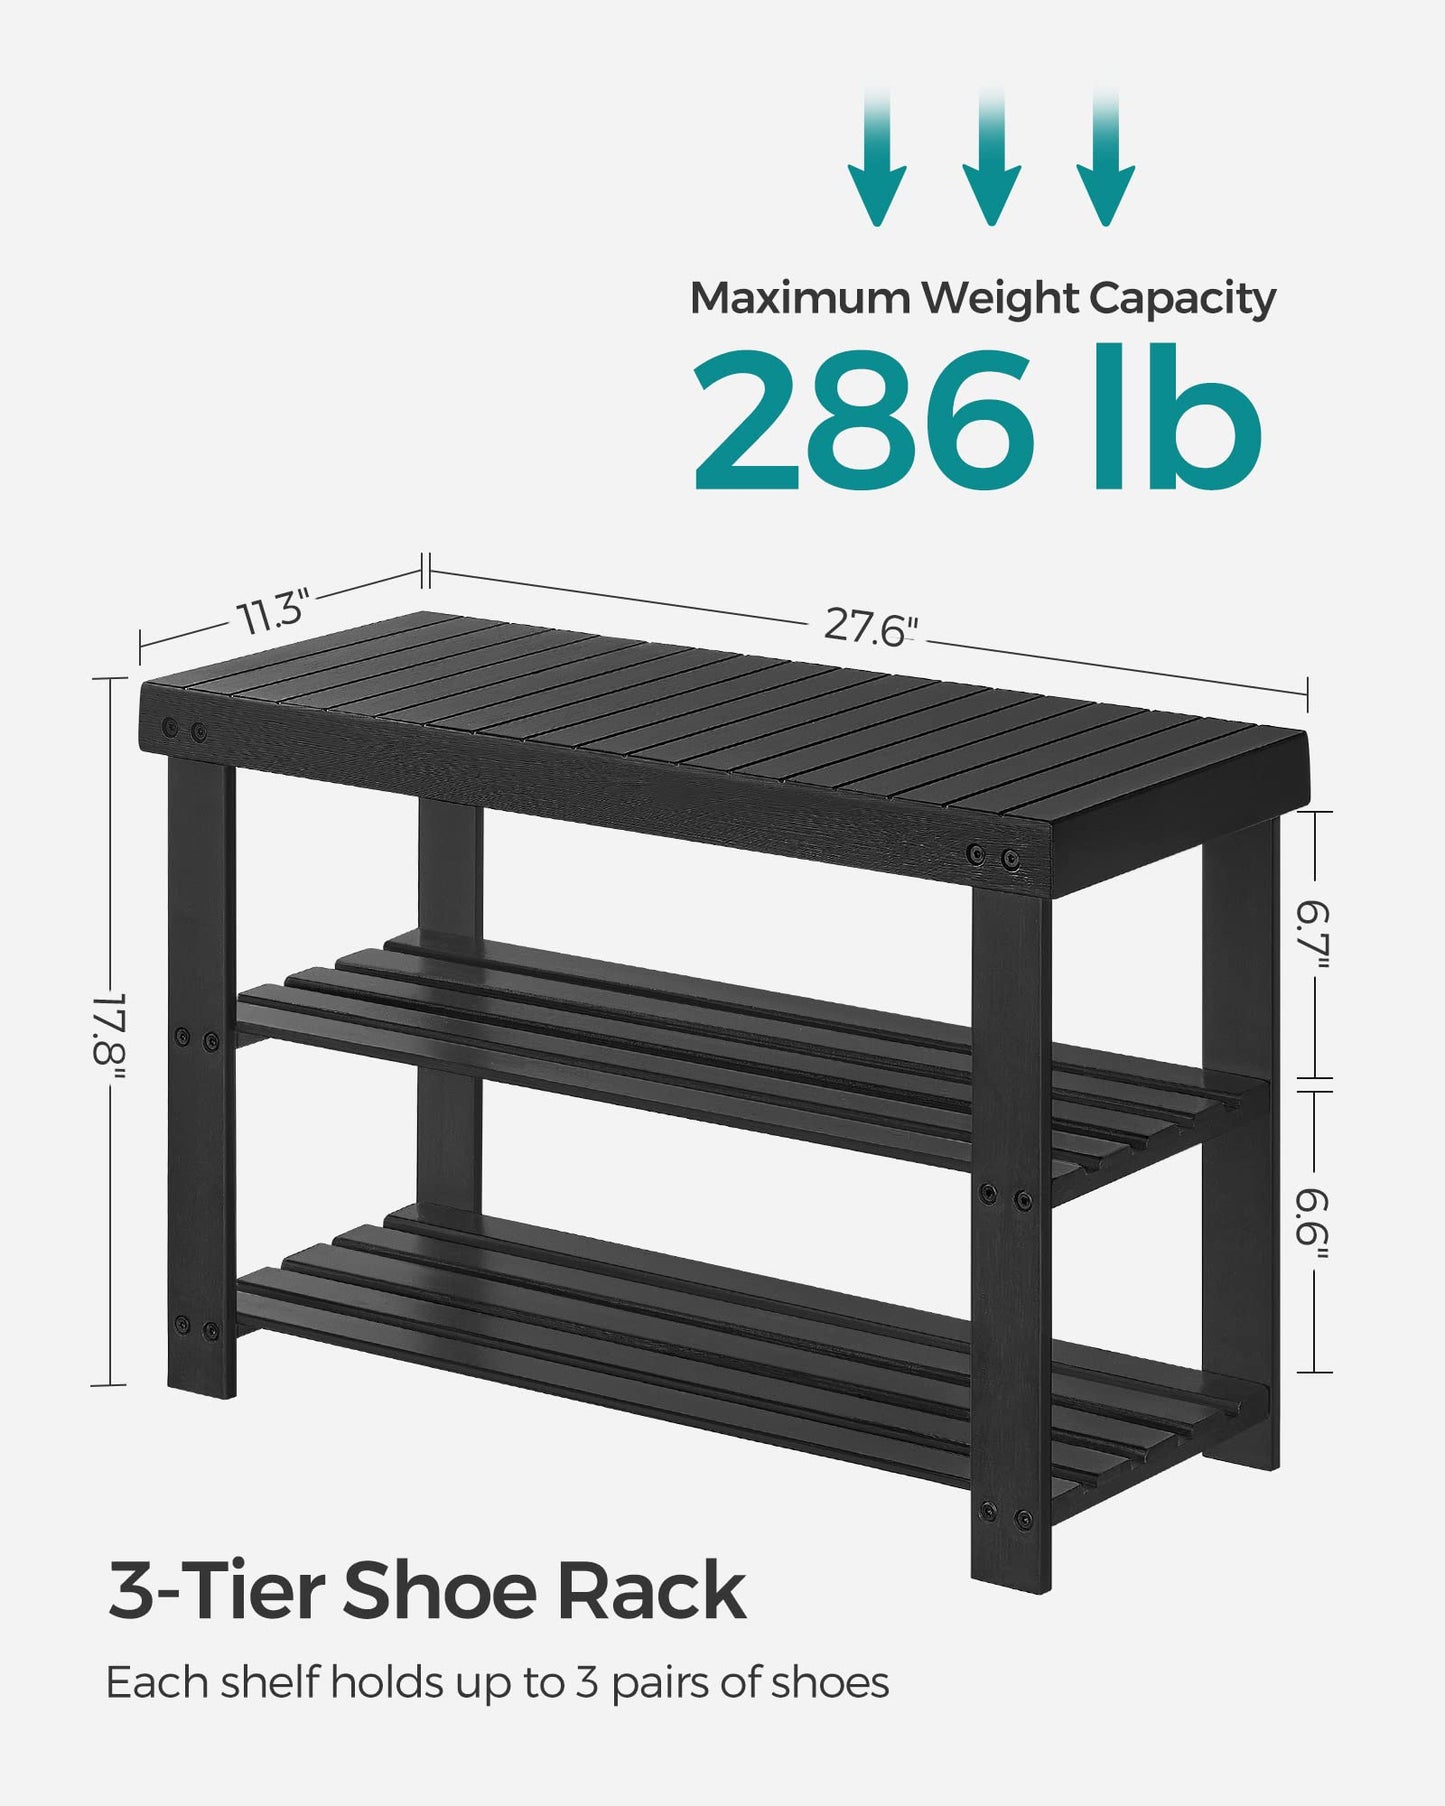 SONGMICS Shoe Rack Bench, 3-Tier Bamboo Shoe Storage Organizer, Entryway Bench, Holds Up to 286 lb, 11.3 x 27.6 x 17.8 Inches, for Entryway Bathroom Bedroom, Black ULBS04H